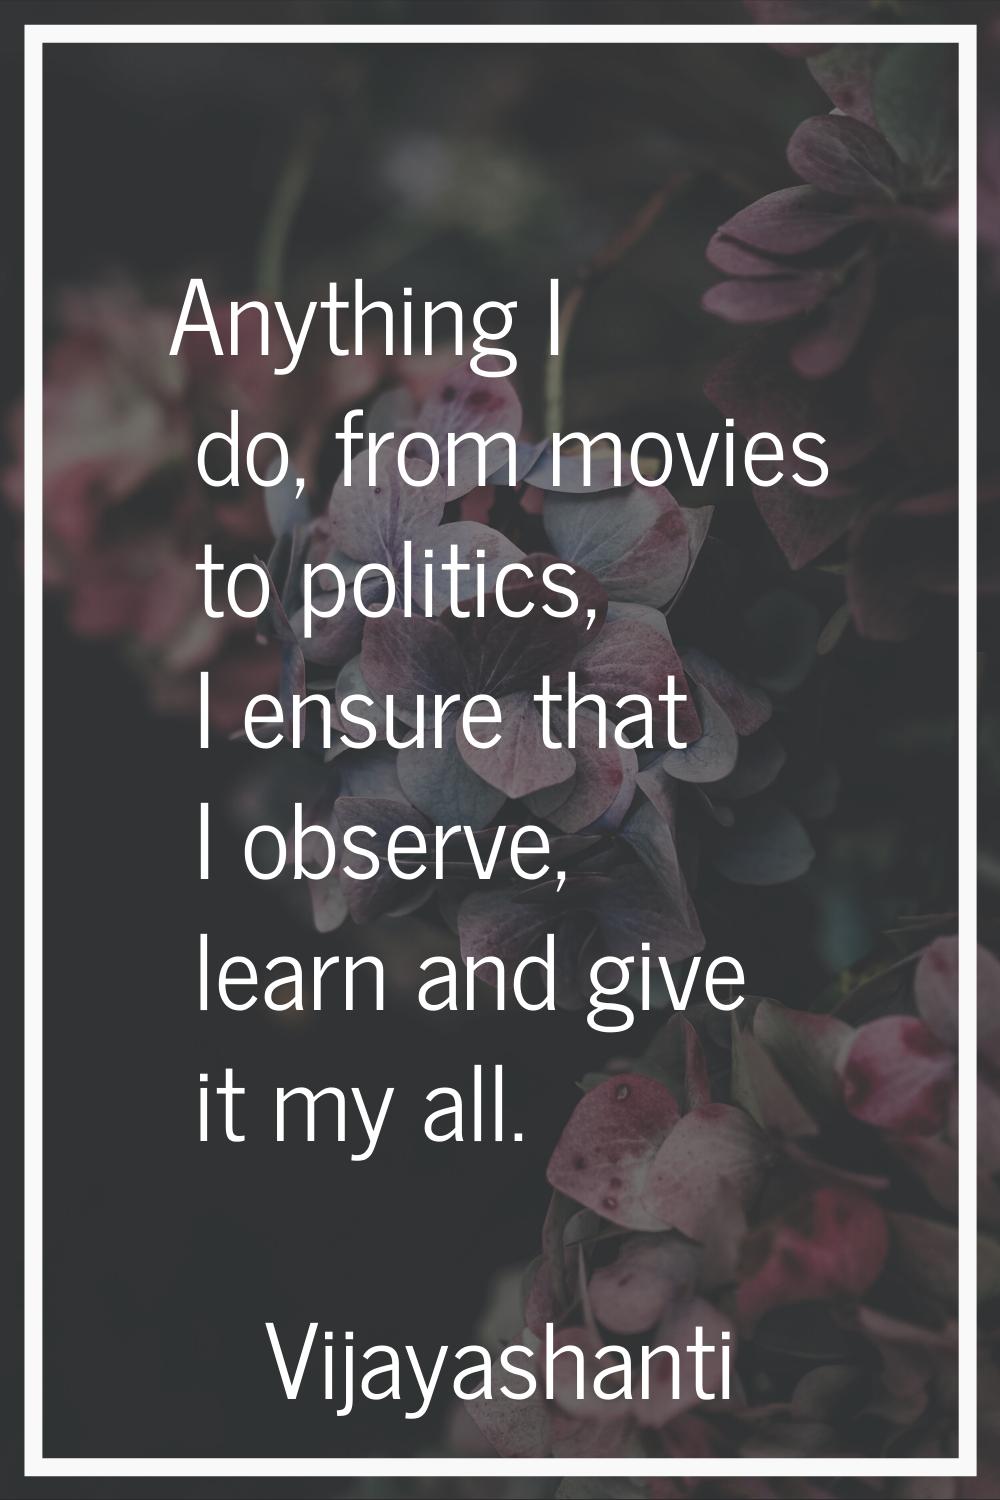 Anything I do, from movies to politics, I ensure that I observe, learn and give it my all.